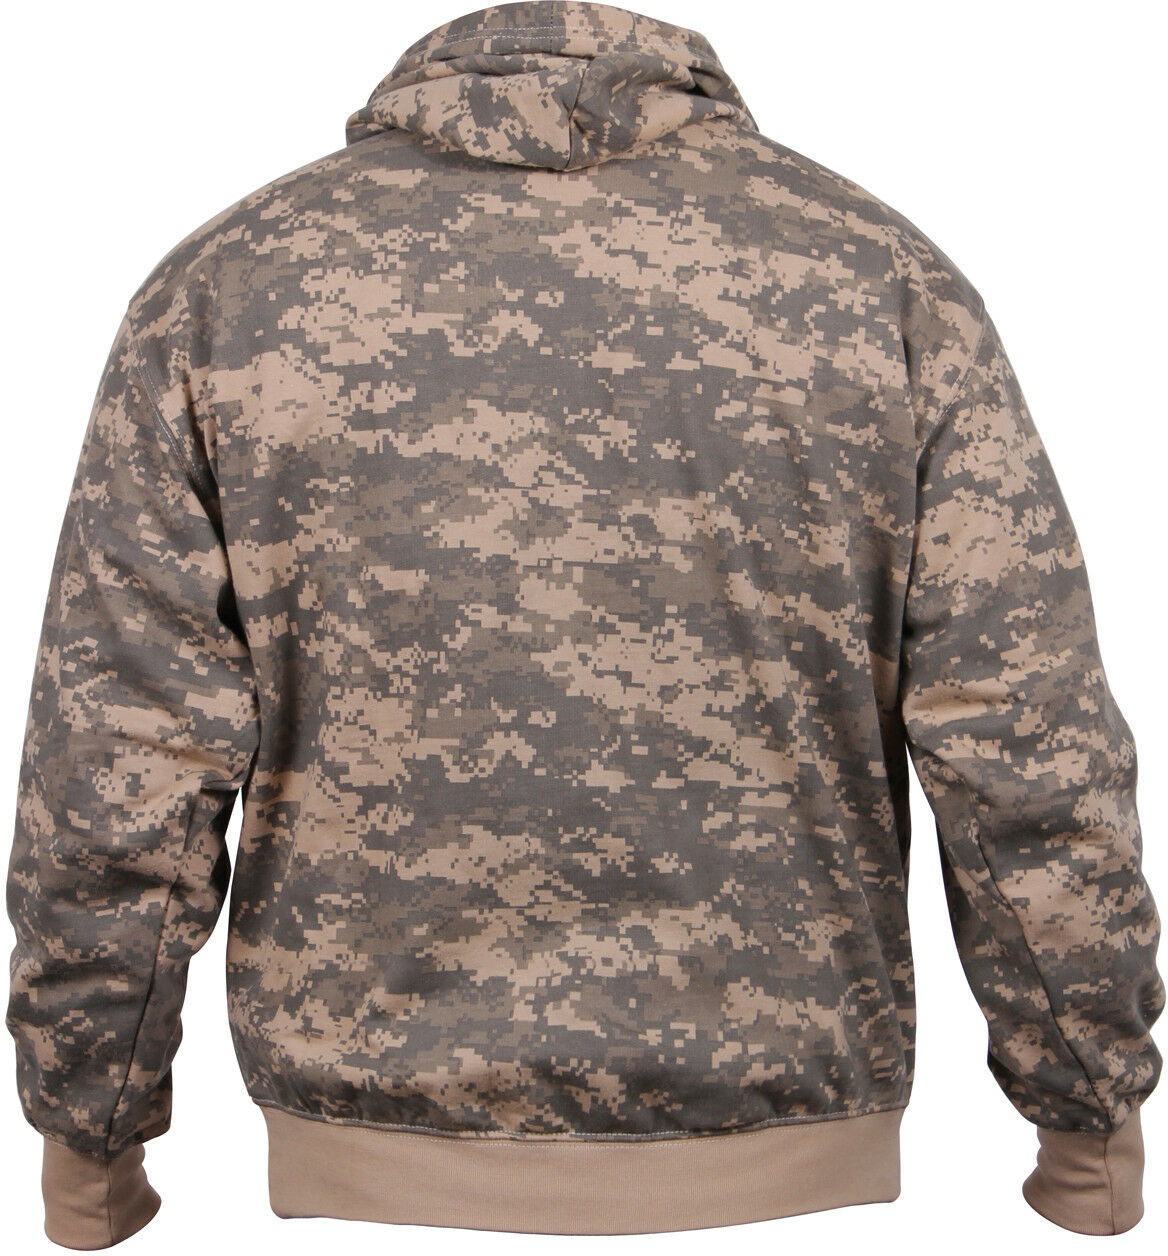 Camo Hoodie Pullover Hooded Sweatshirt Army Military Camouflage ...